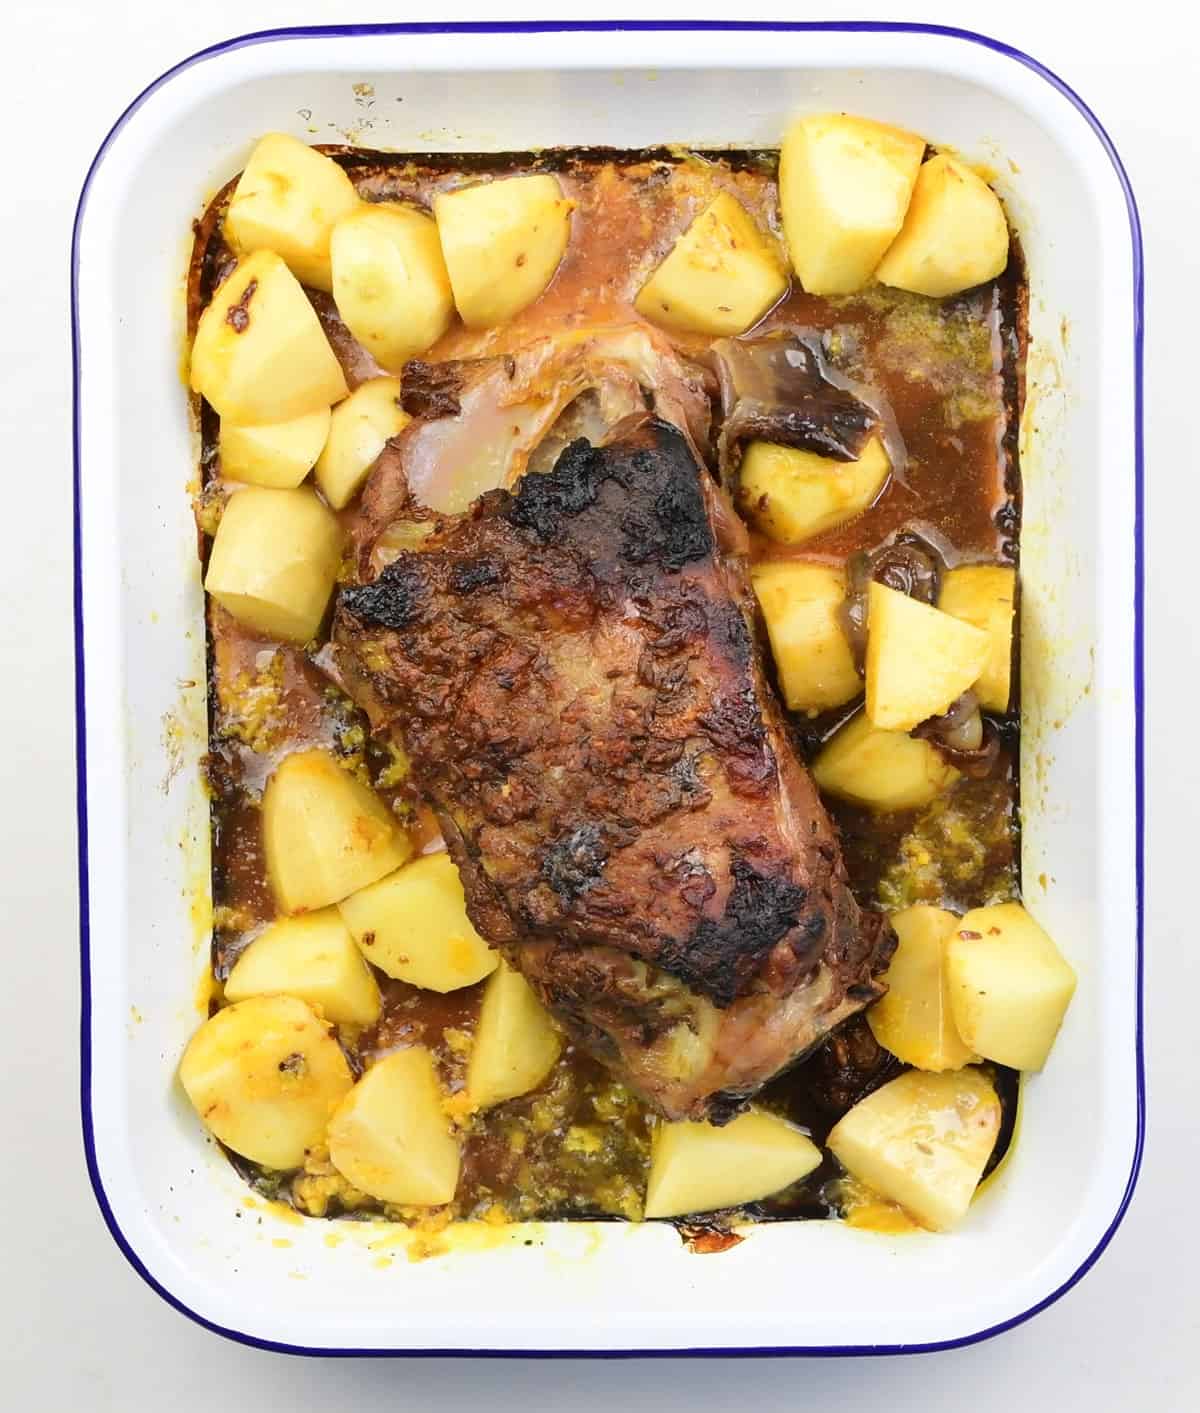 Spiced lamb shoulder in a roasting tin with chopped potatoes